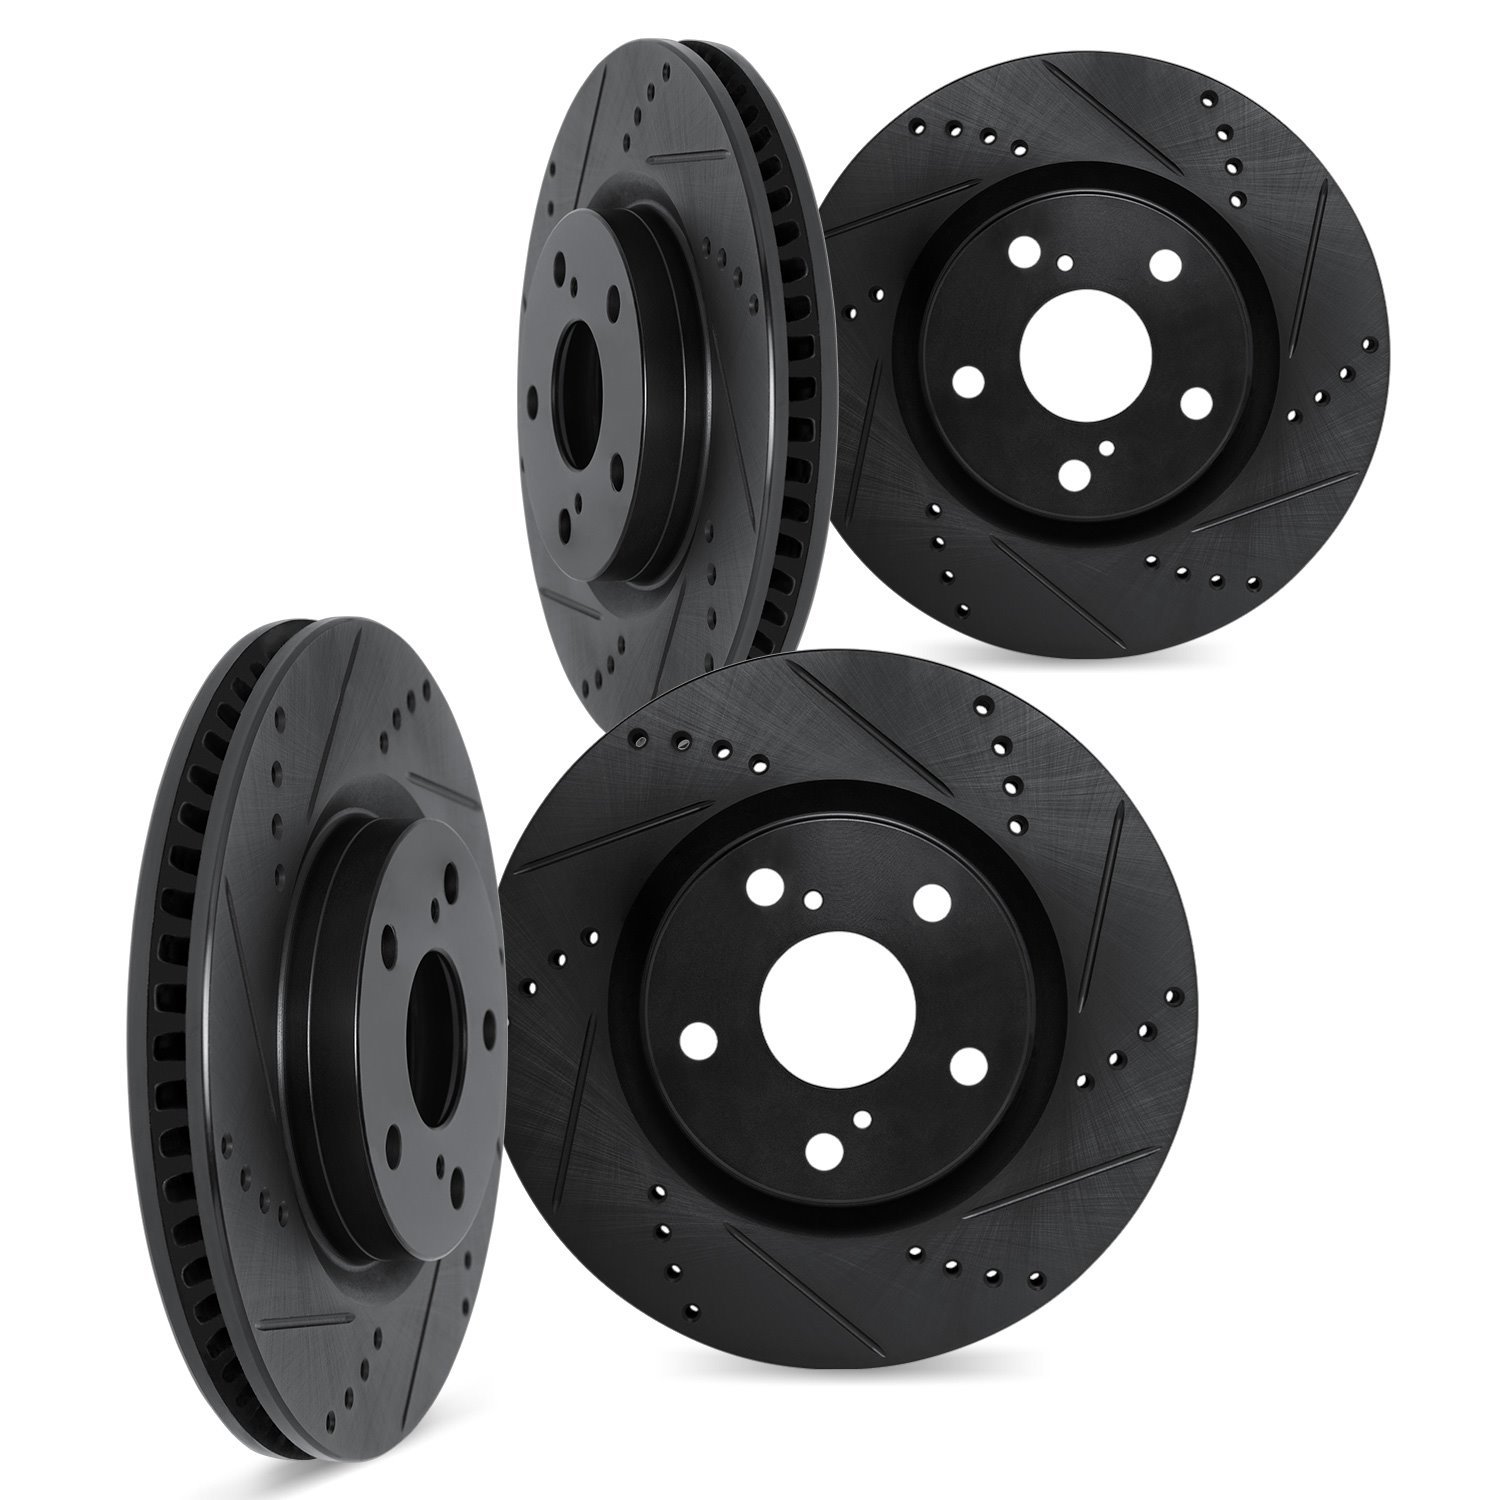 8004-67006 Drilled/Slotted Brake Rotors [Black], 2003-2005 Infiniti/Nissan, Position: Front and Rear